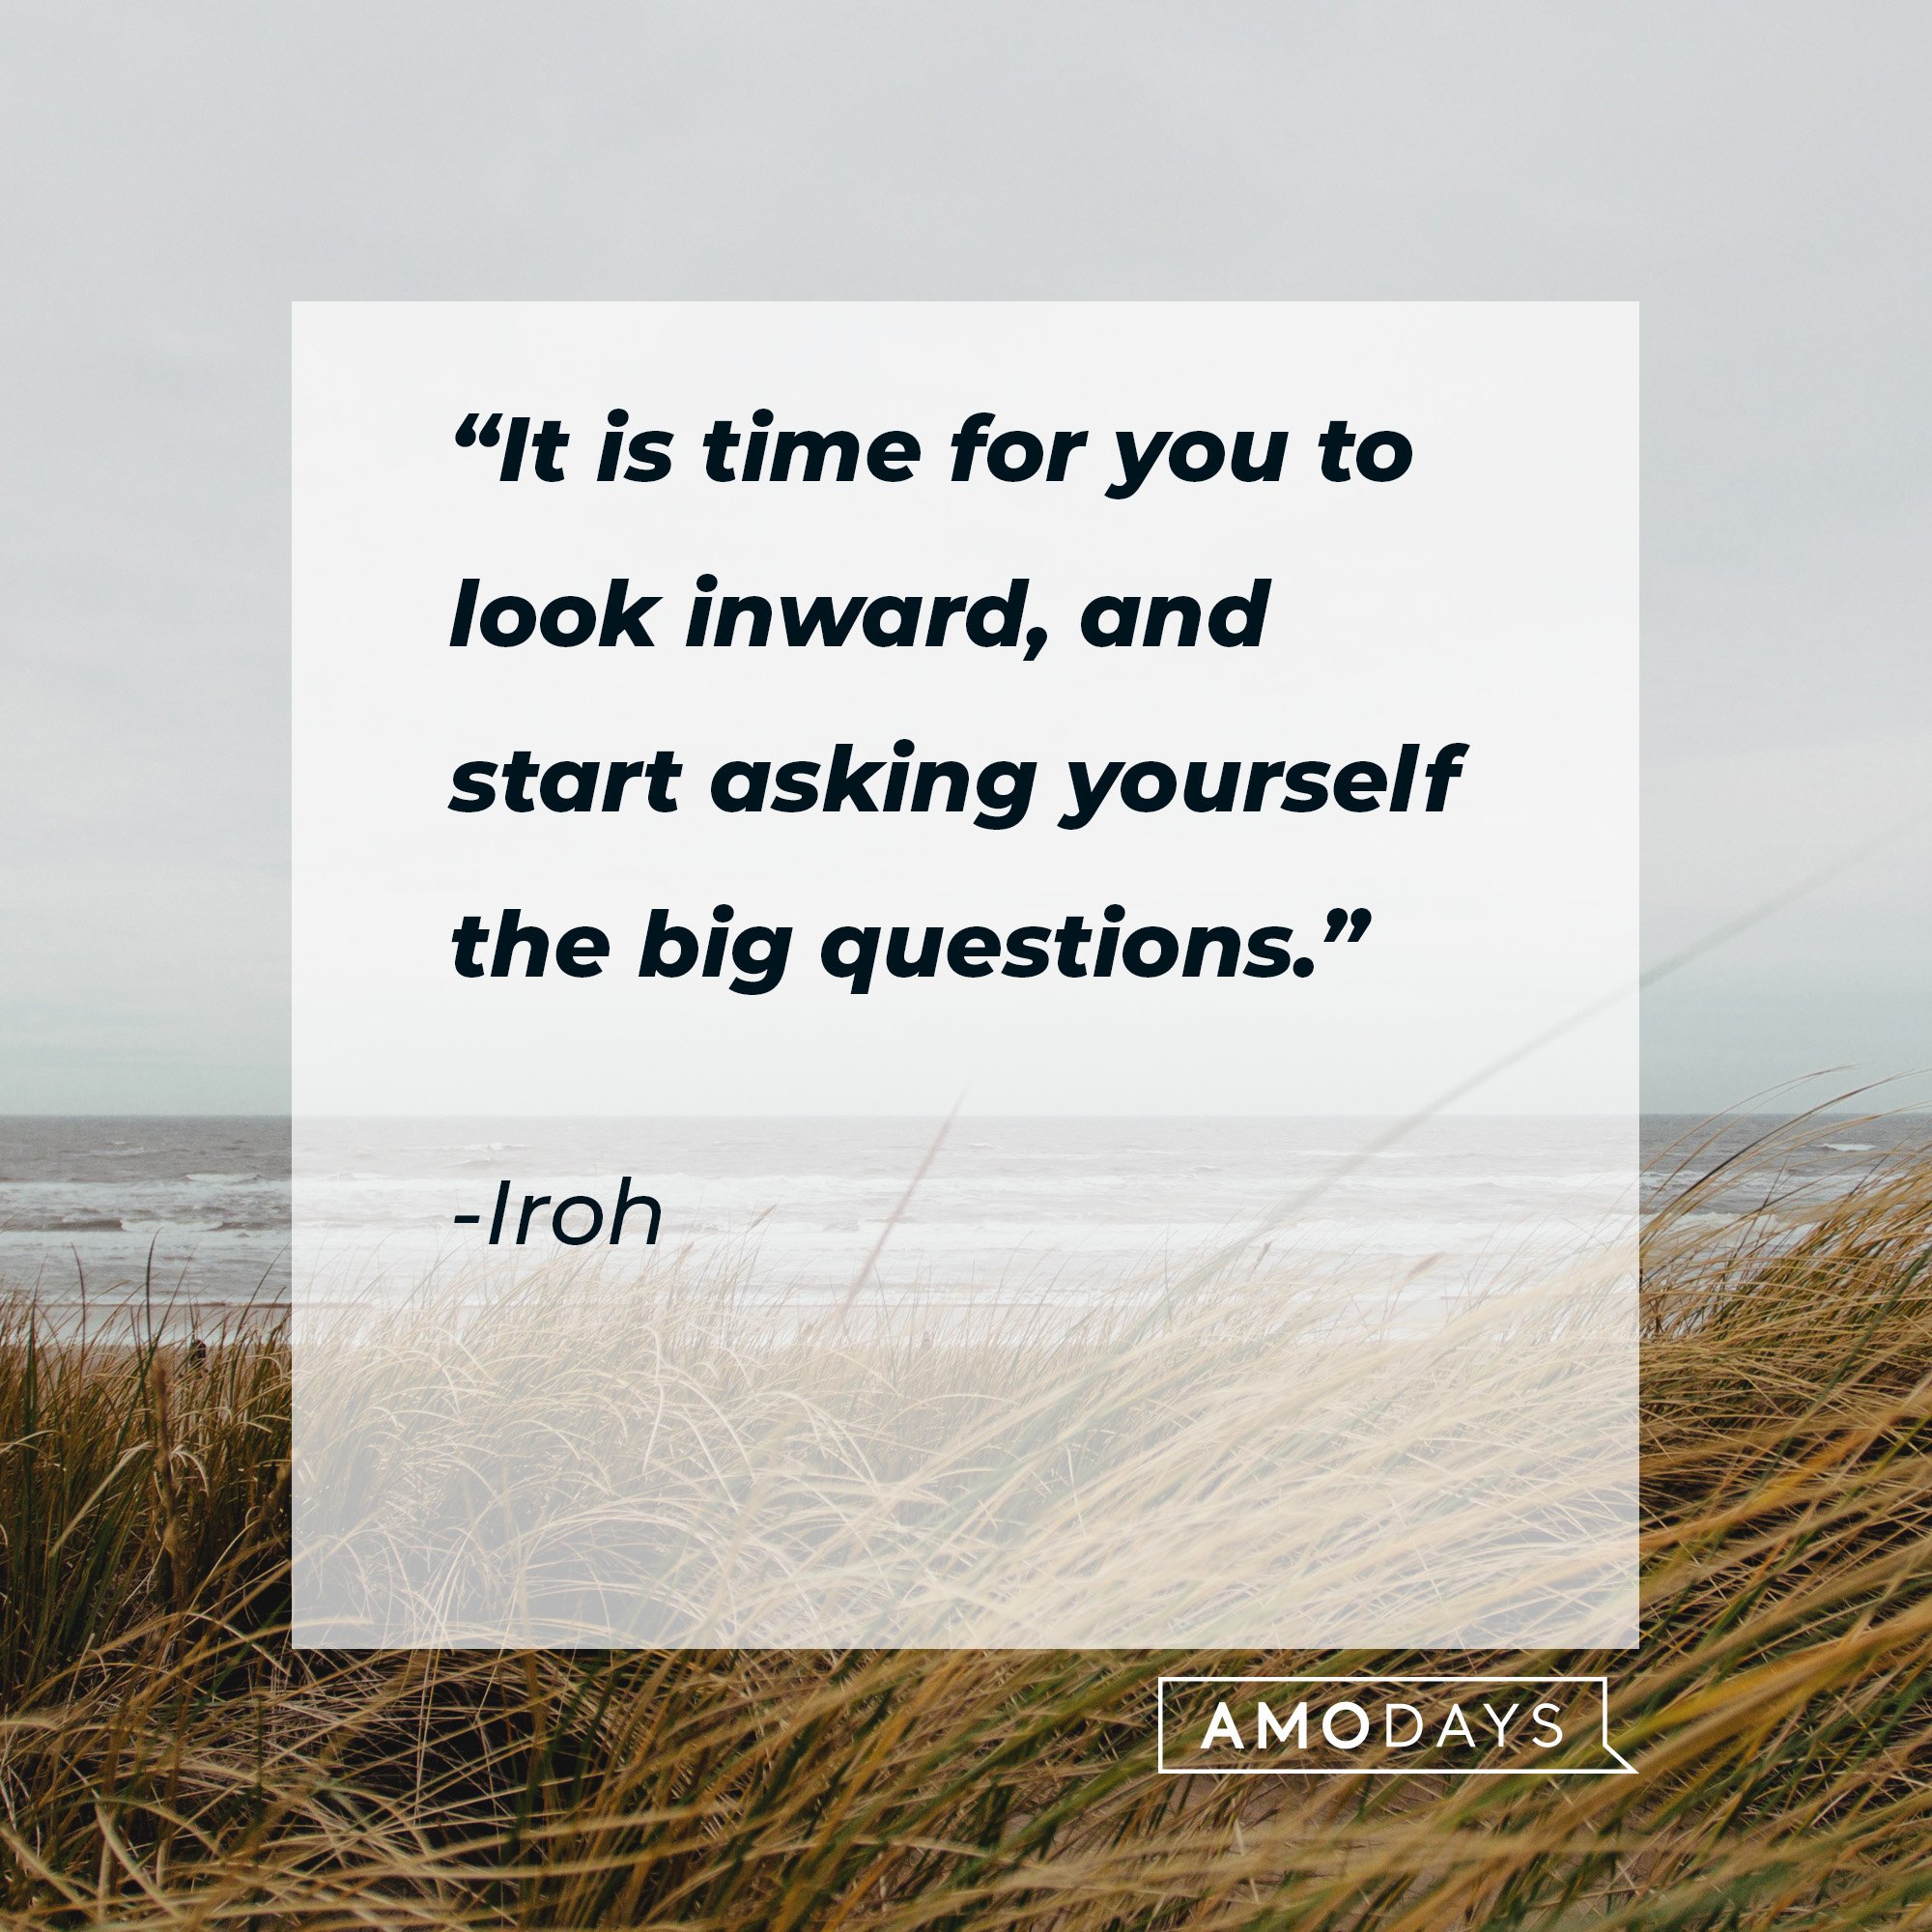  Iroh's quote: “It is time for you to look inward, and start asking yourself the big questions.” | Image: AmoDays